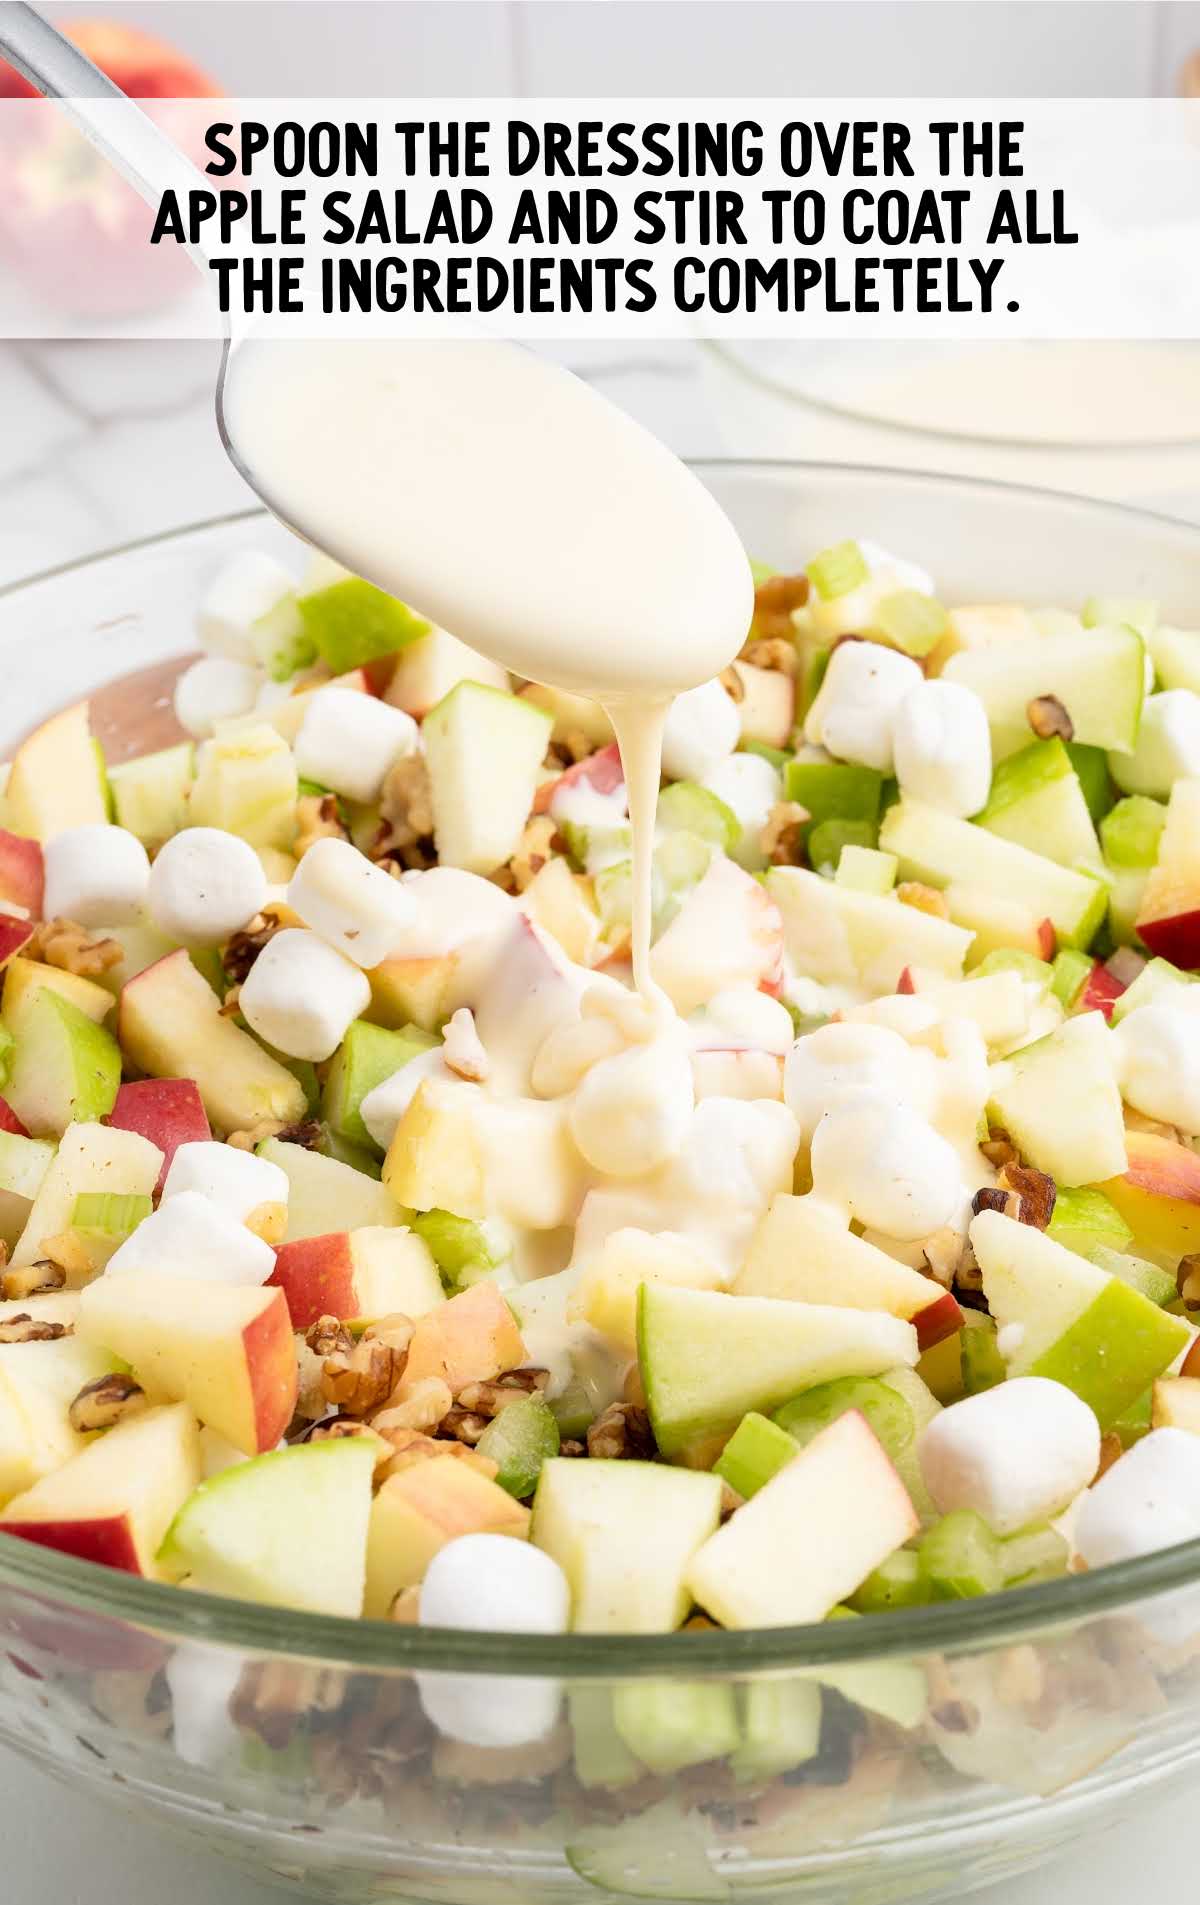 dressing spoon over the apple salad in a bowl